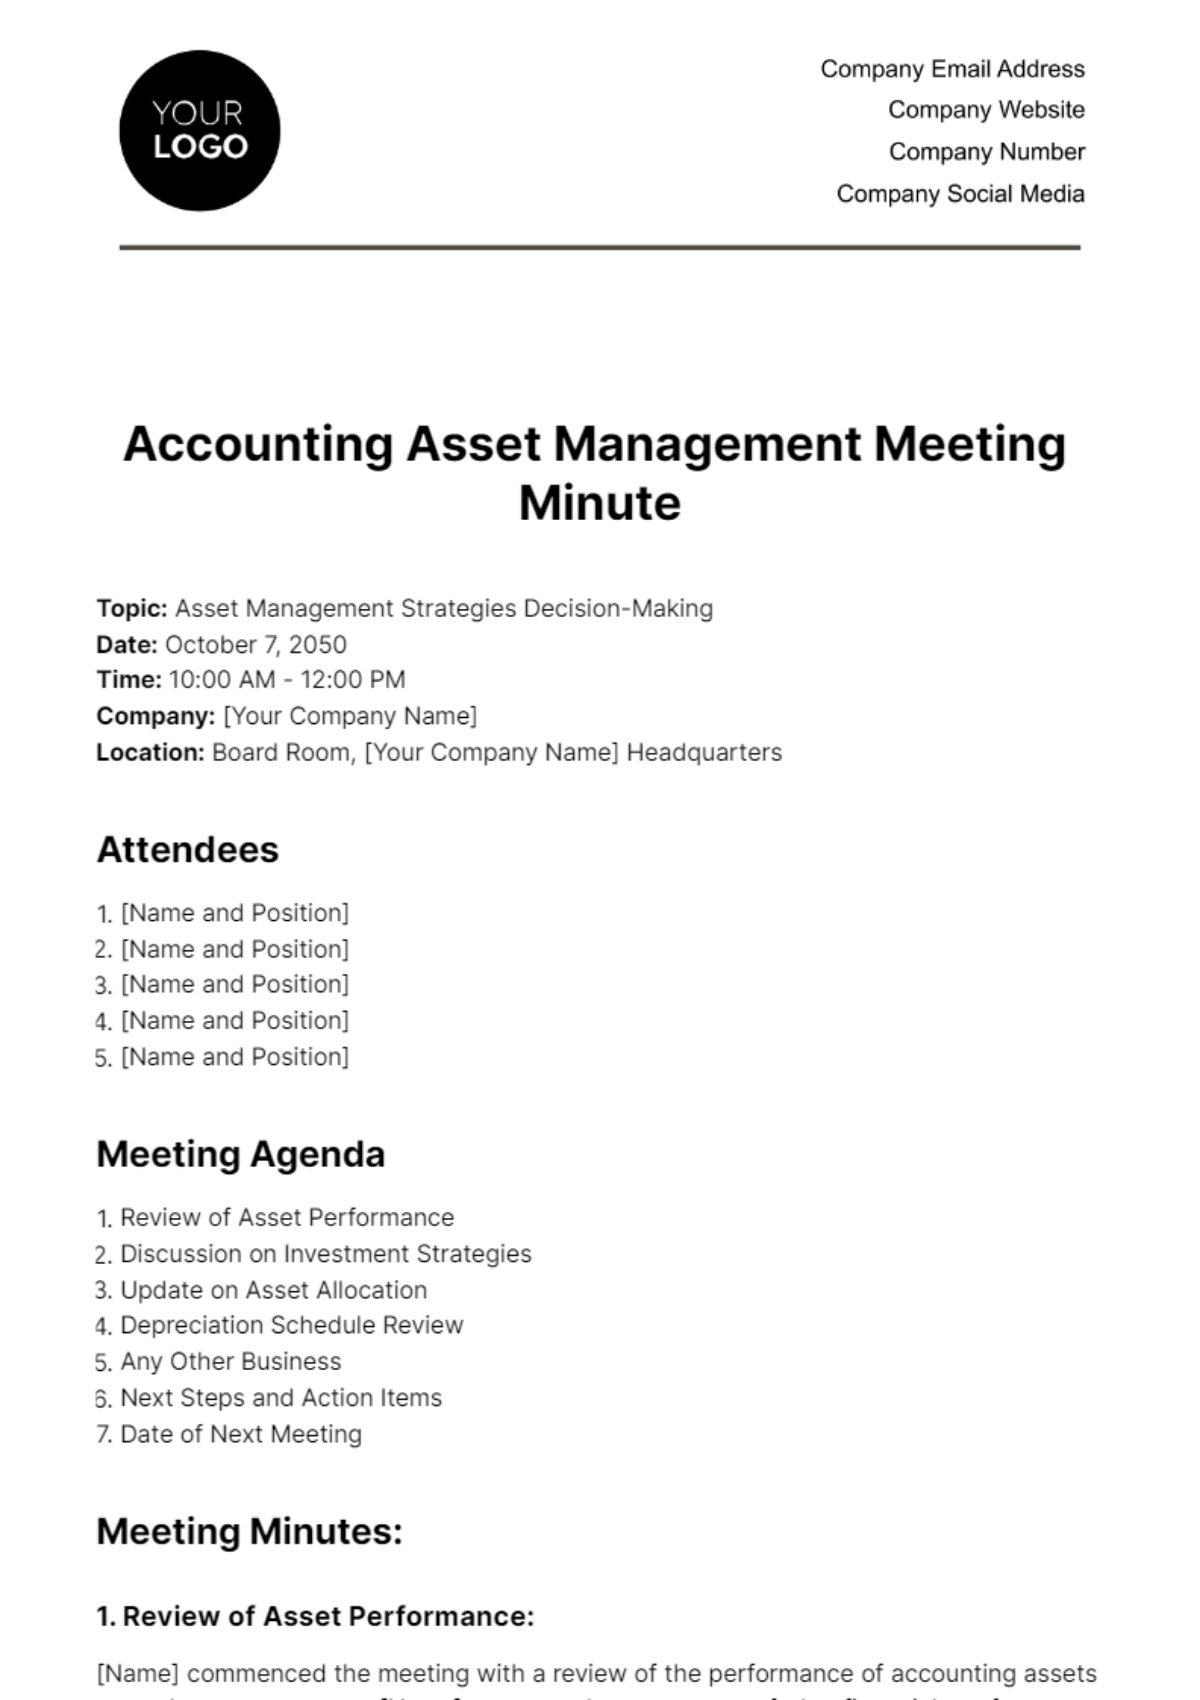 Free Accounting Asset Management Meeting Minute Template